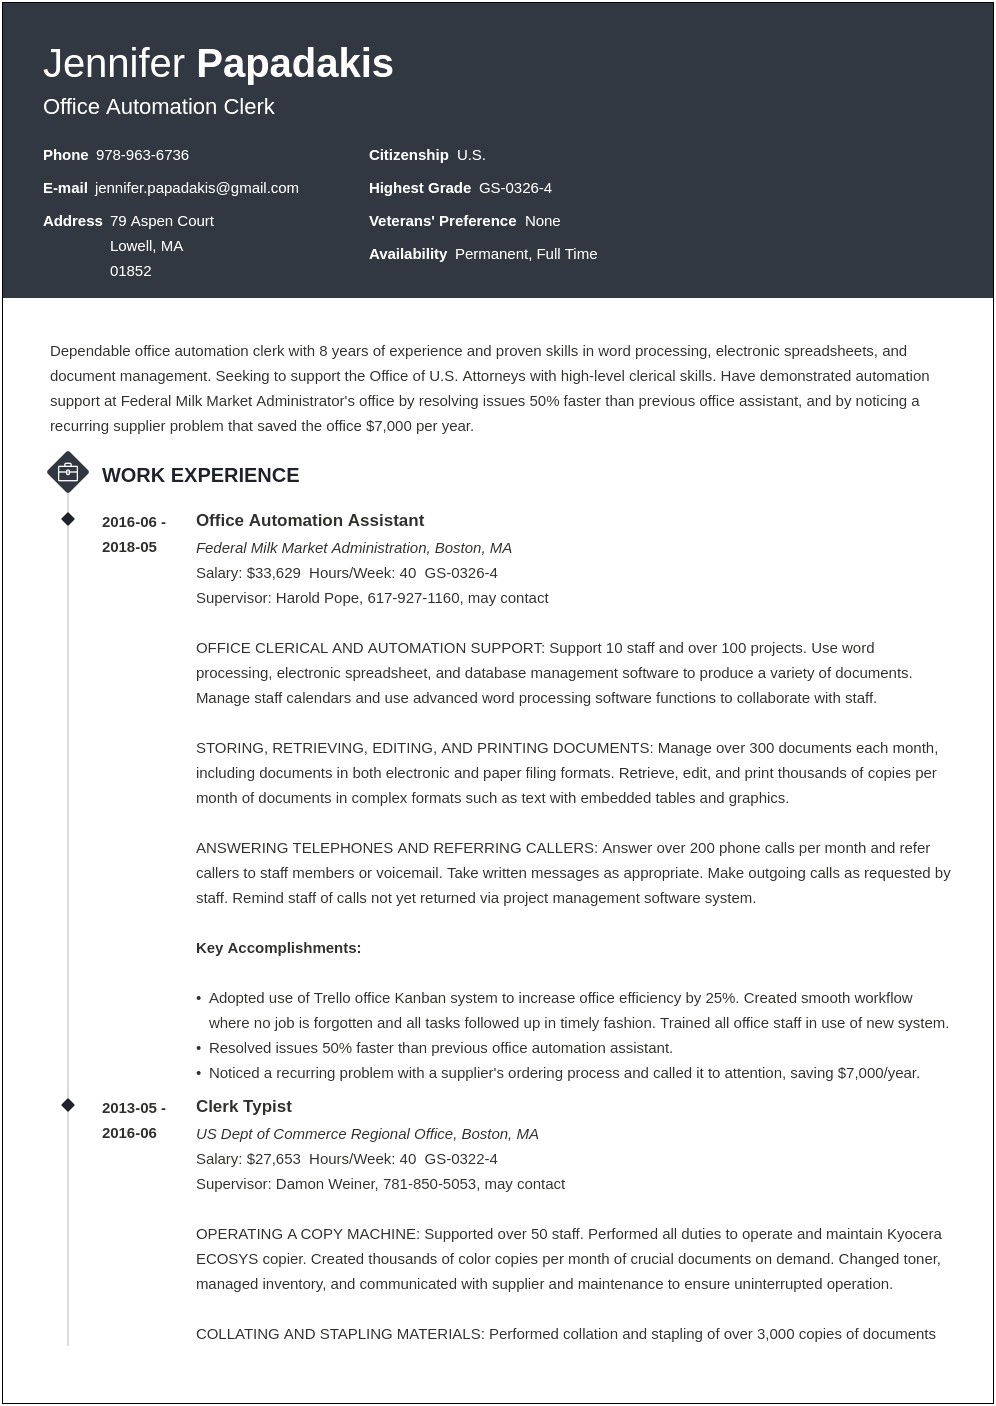 Sample Resume Project Manager Federal Goverment